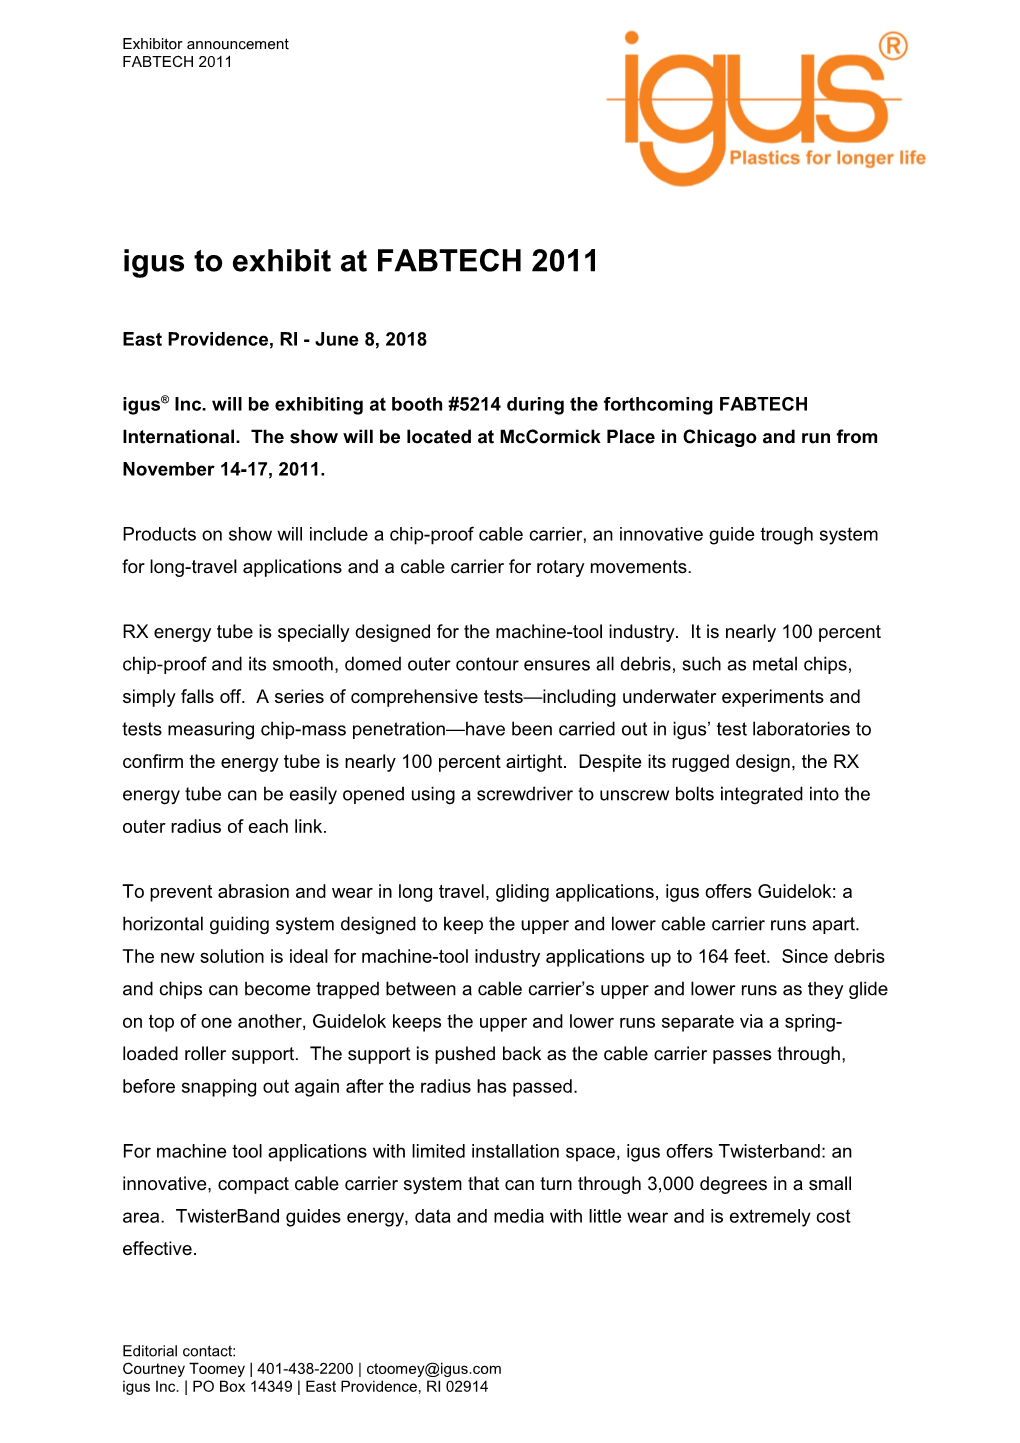 Igus to Exhibit at FABTECH 2011